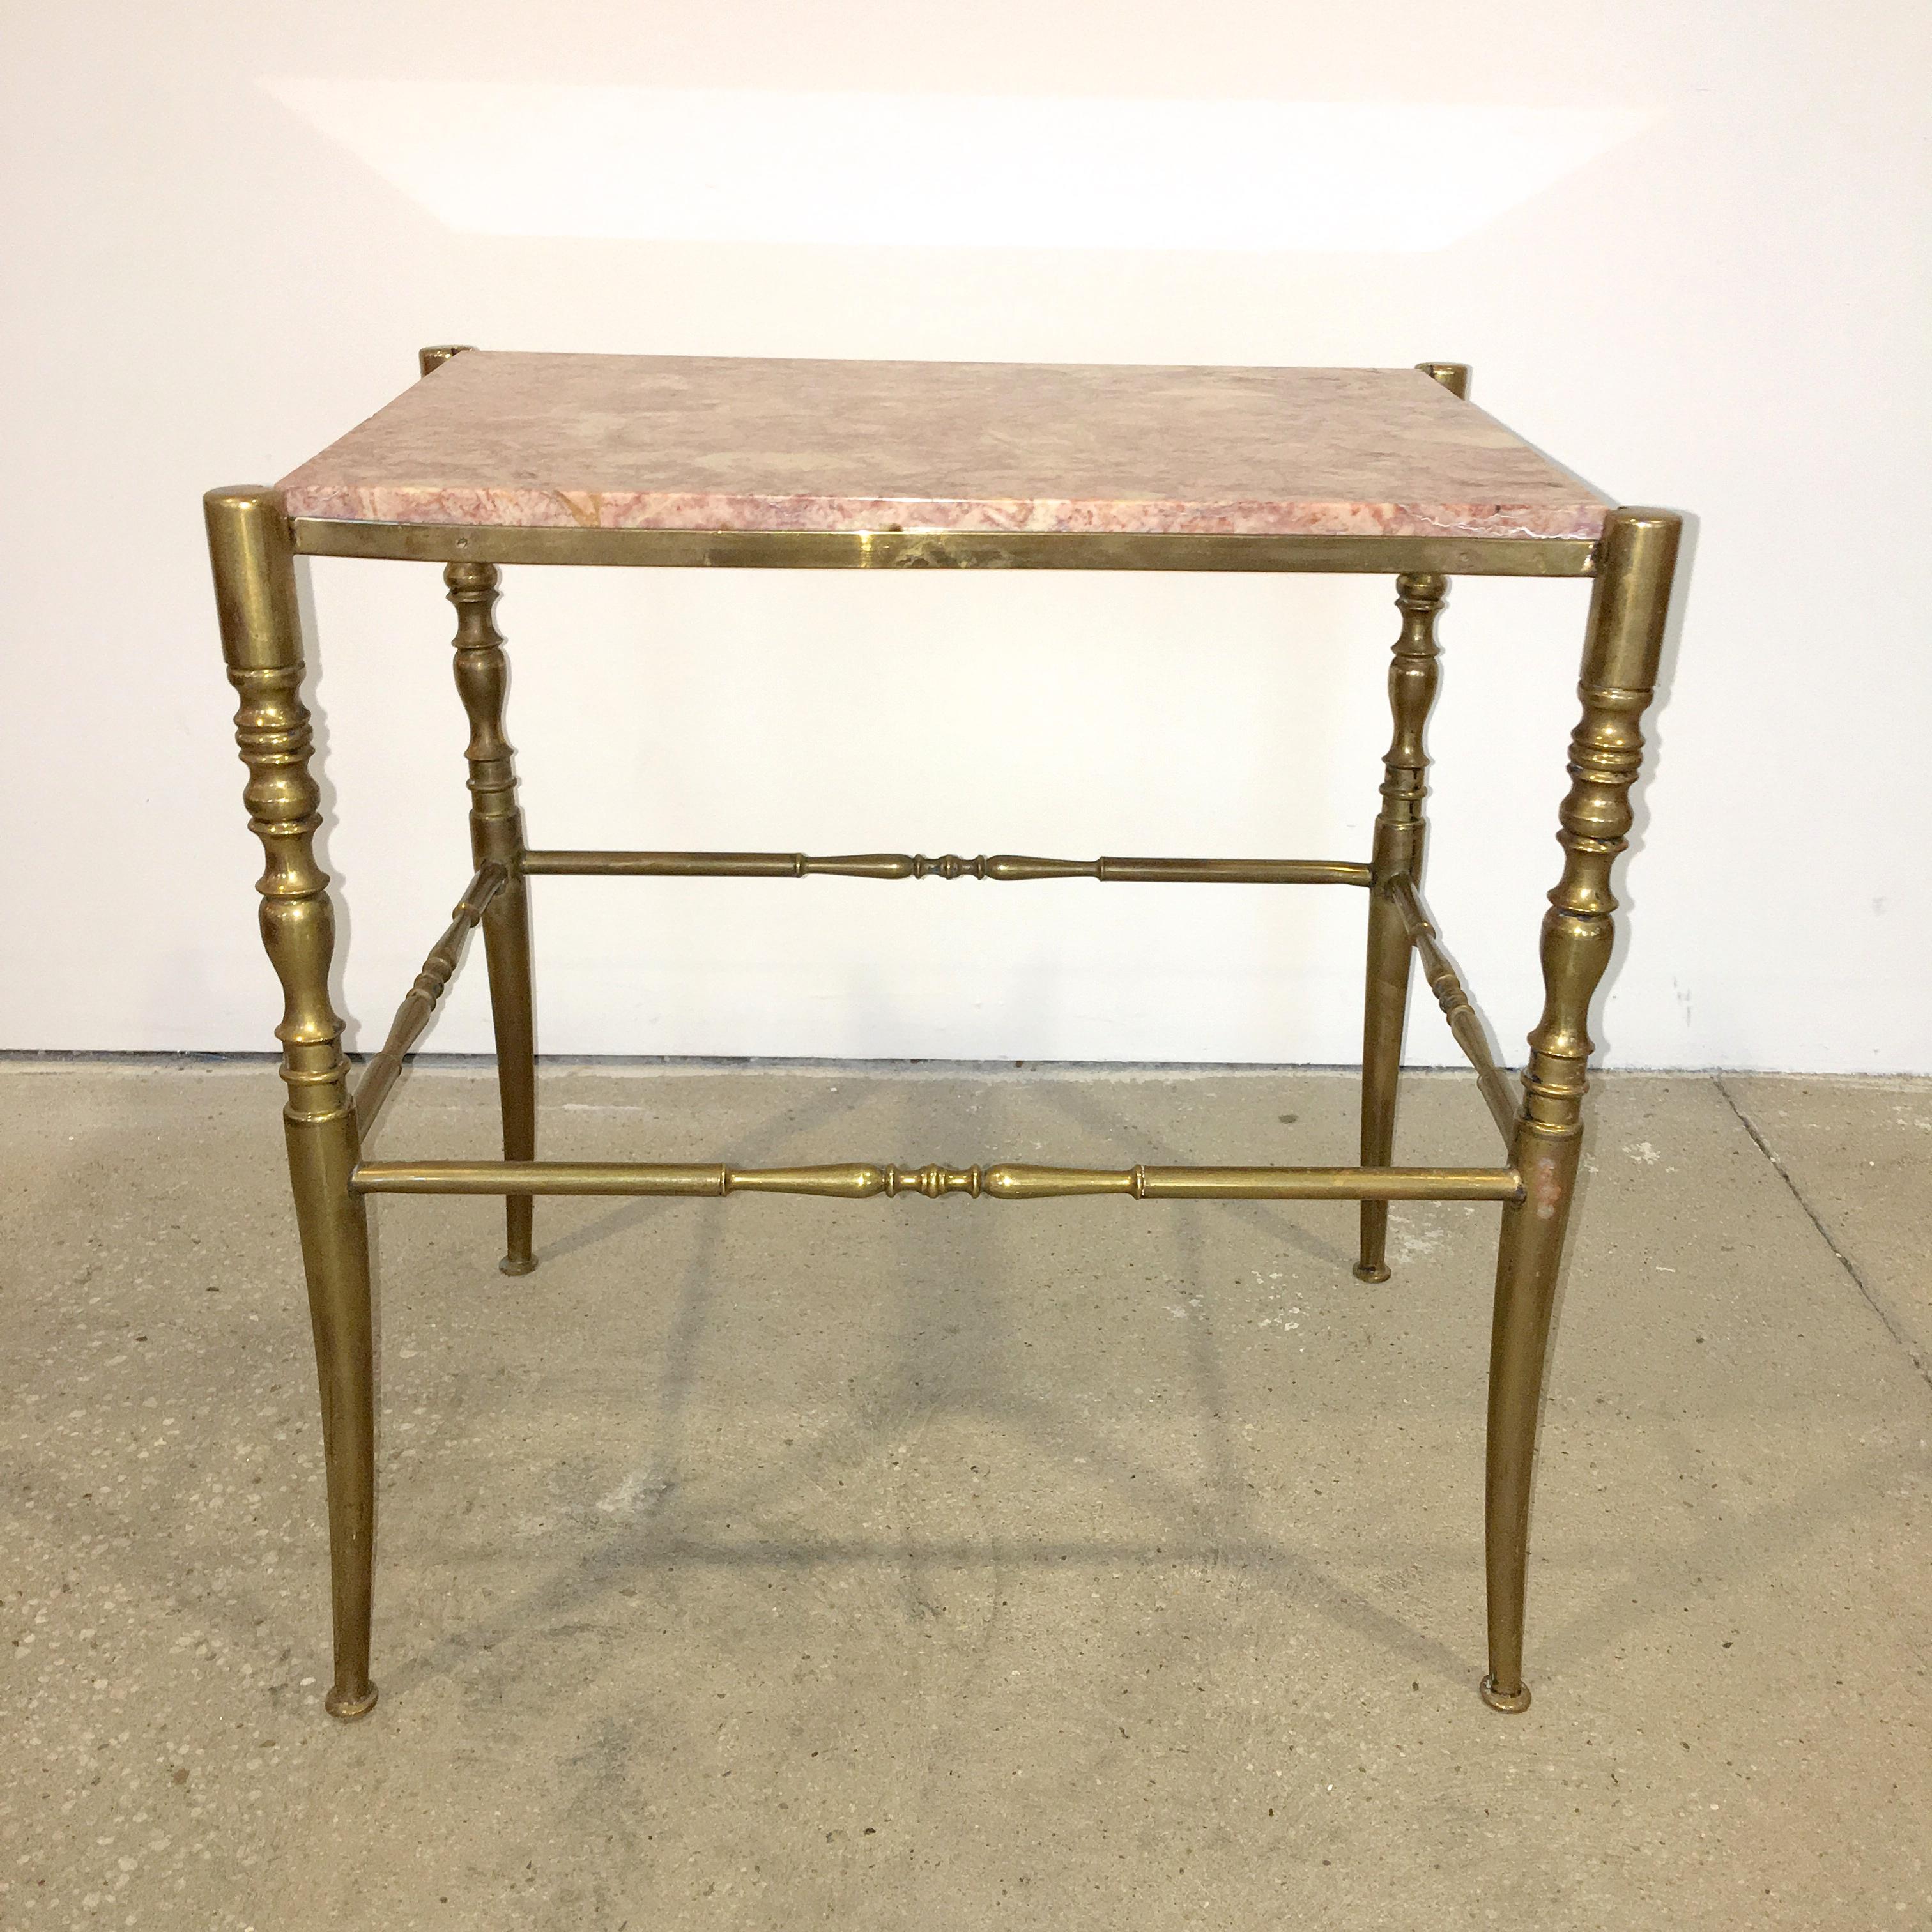 Rare to find solid brass rectangular form side table with marble top from the creators of the iconic brass Chiavari chair.